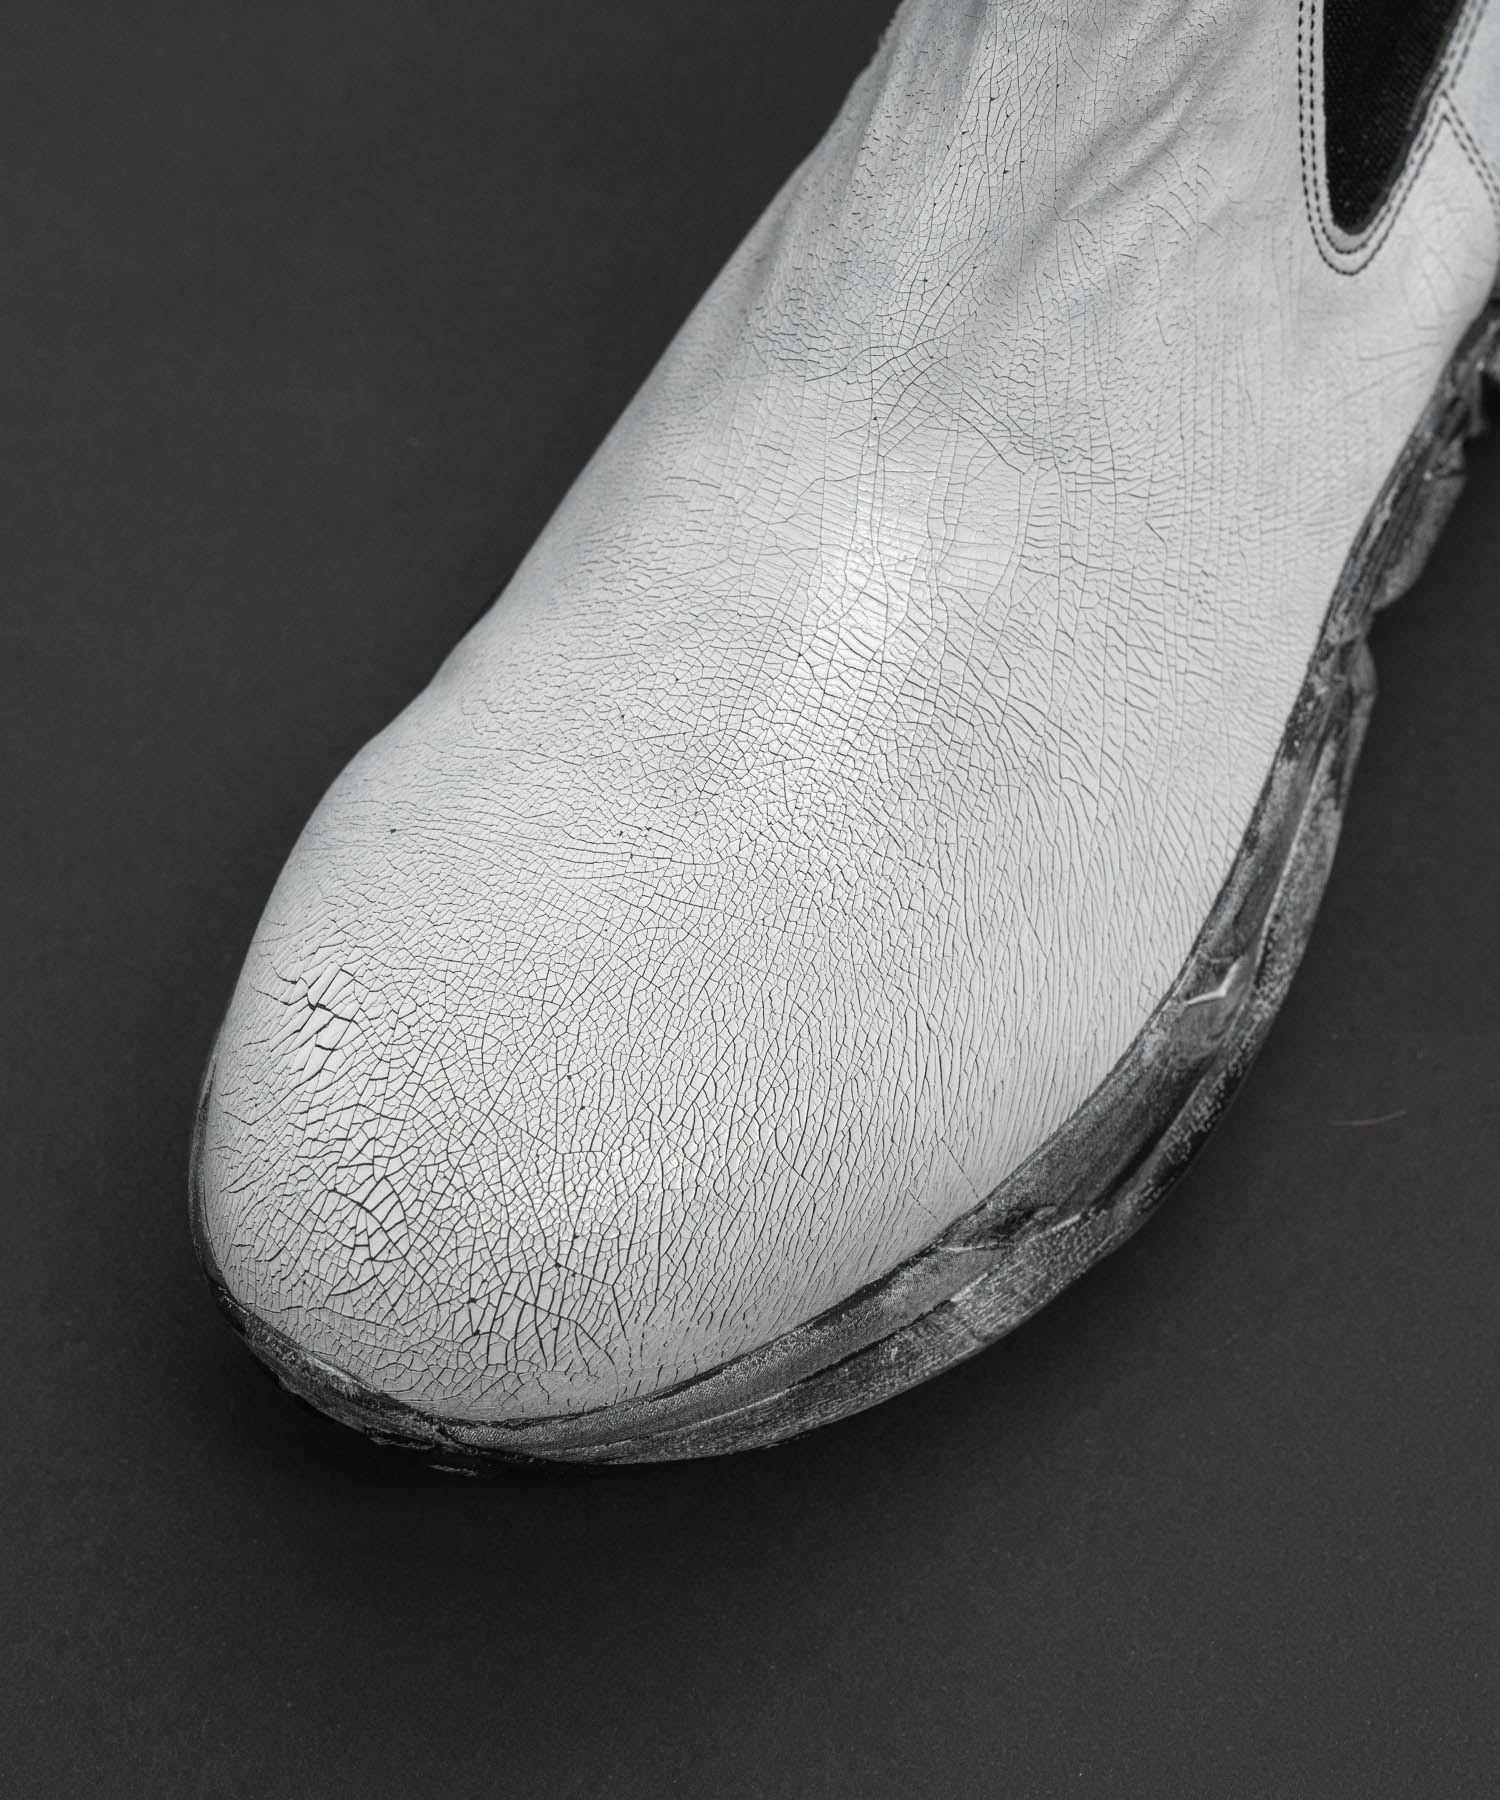 [Special SHOES FACTORY COLLABORATION] VIBRAM SOLE SOLE SIDE SIDE BOOTS MADE in TOKYO